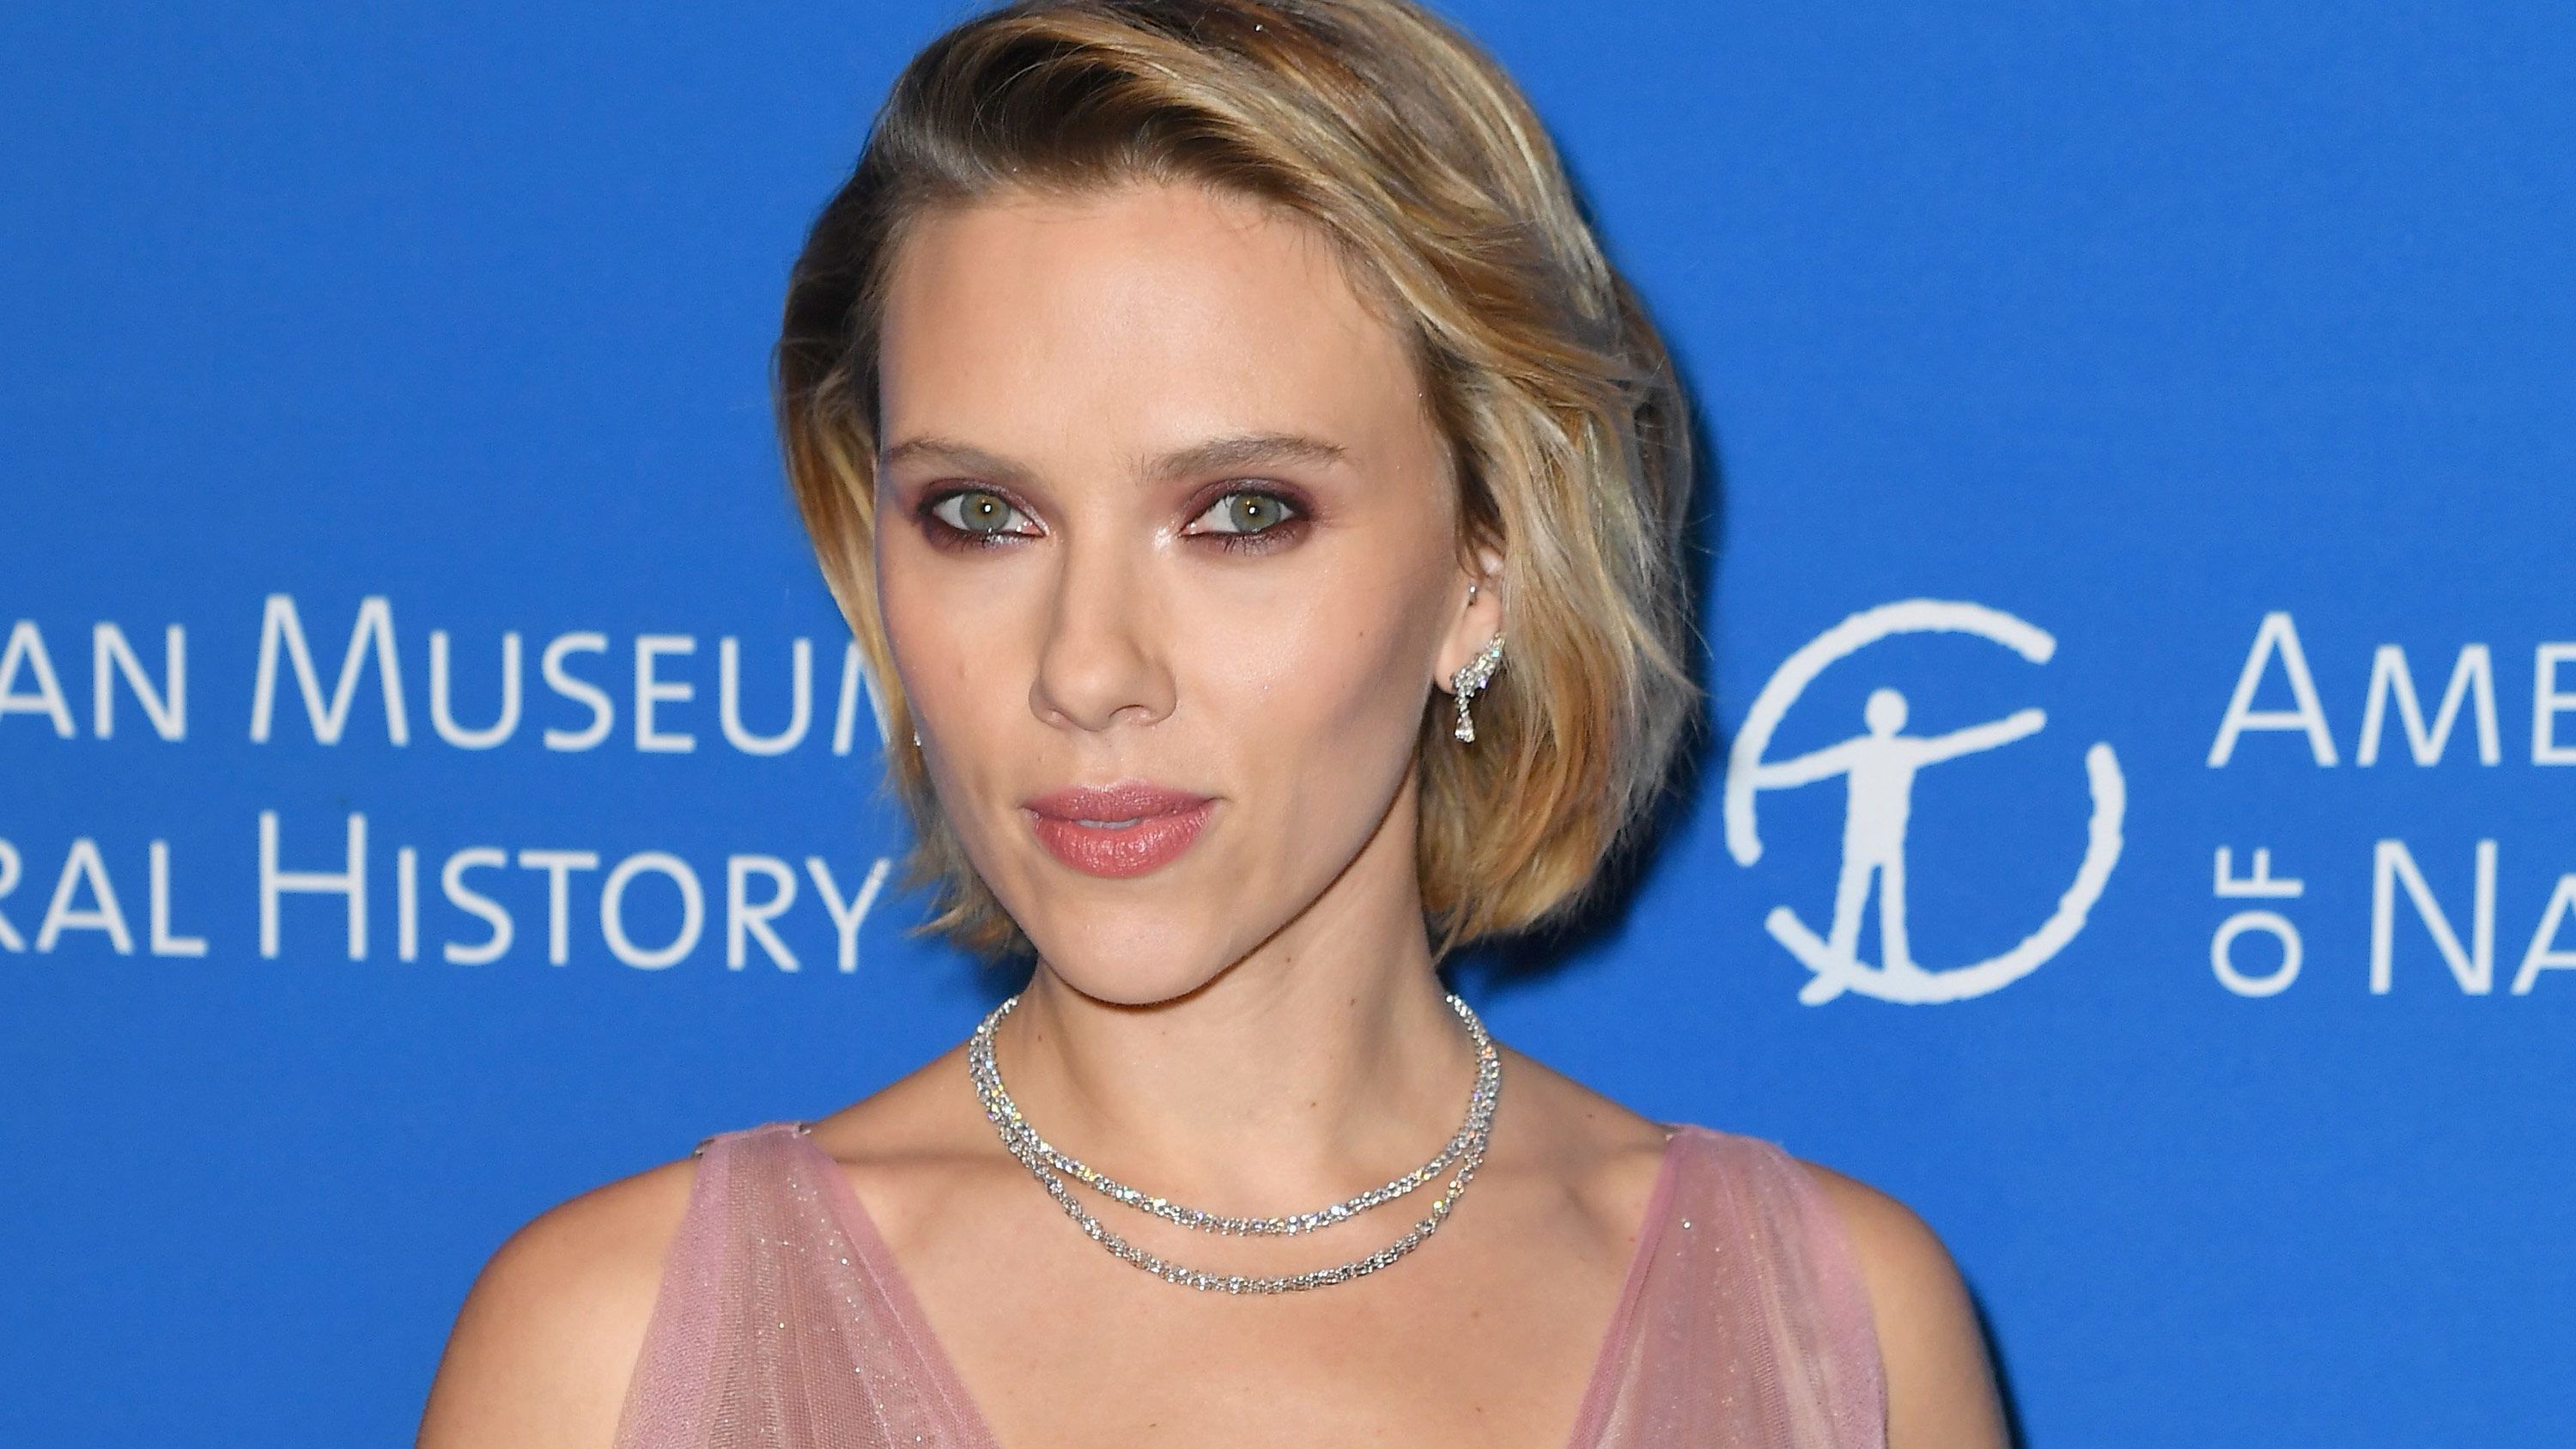 Scarlett Johansson Joins Growing Chorus of Criticism Against the